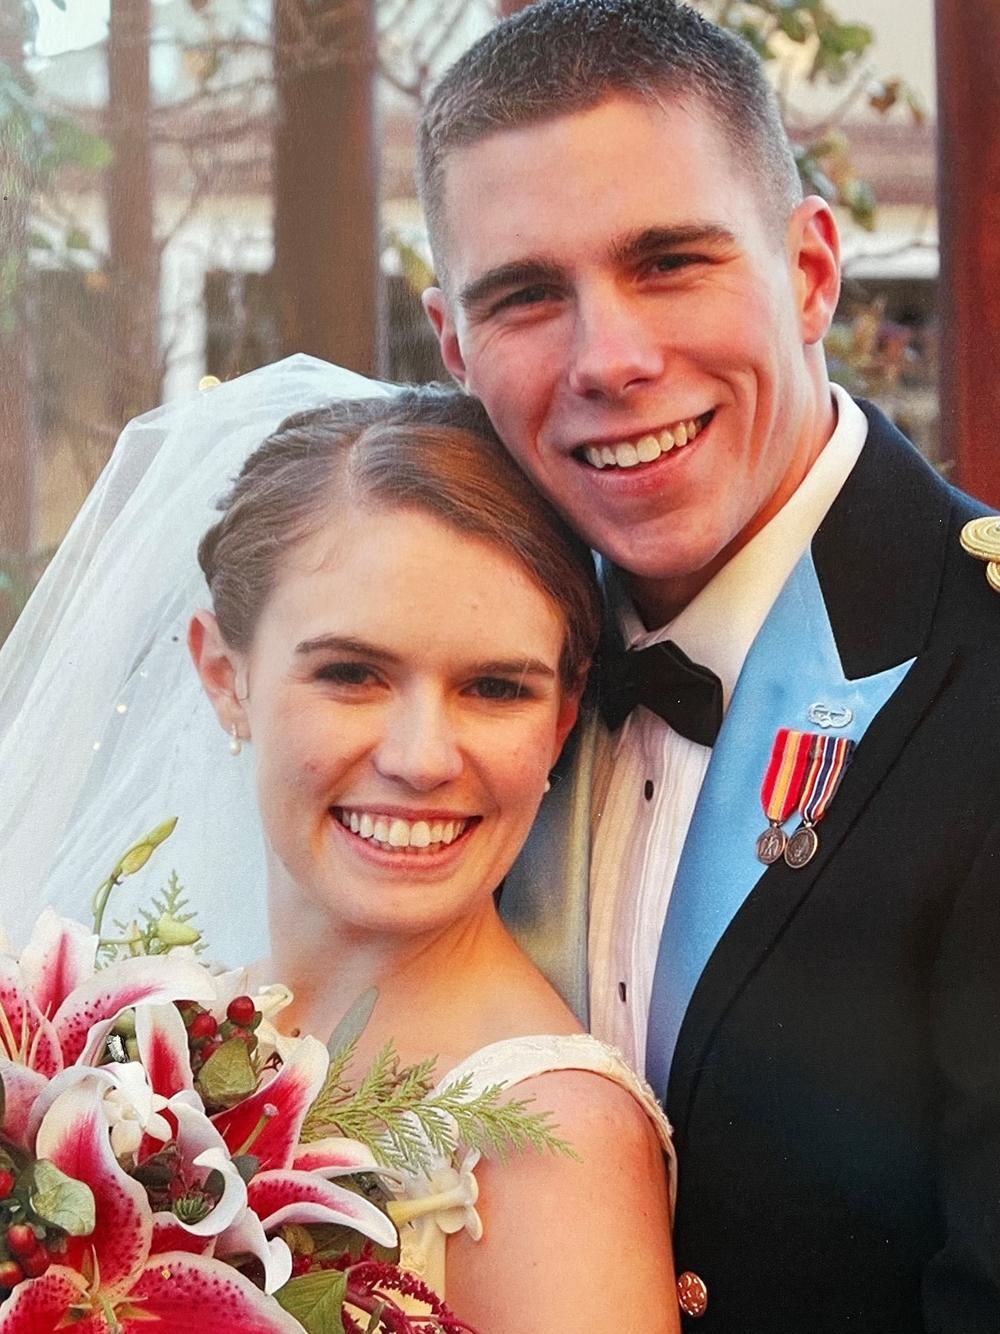 Chris Goeke and his wife Kelsey Haggerty on their wedding day. They were married shortly after he graduated from West Point and before he was deployed to Afghanistan.